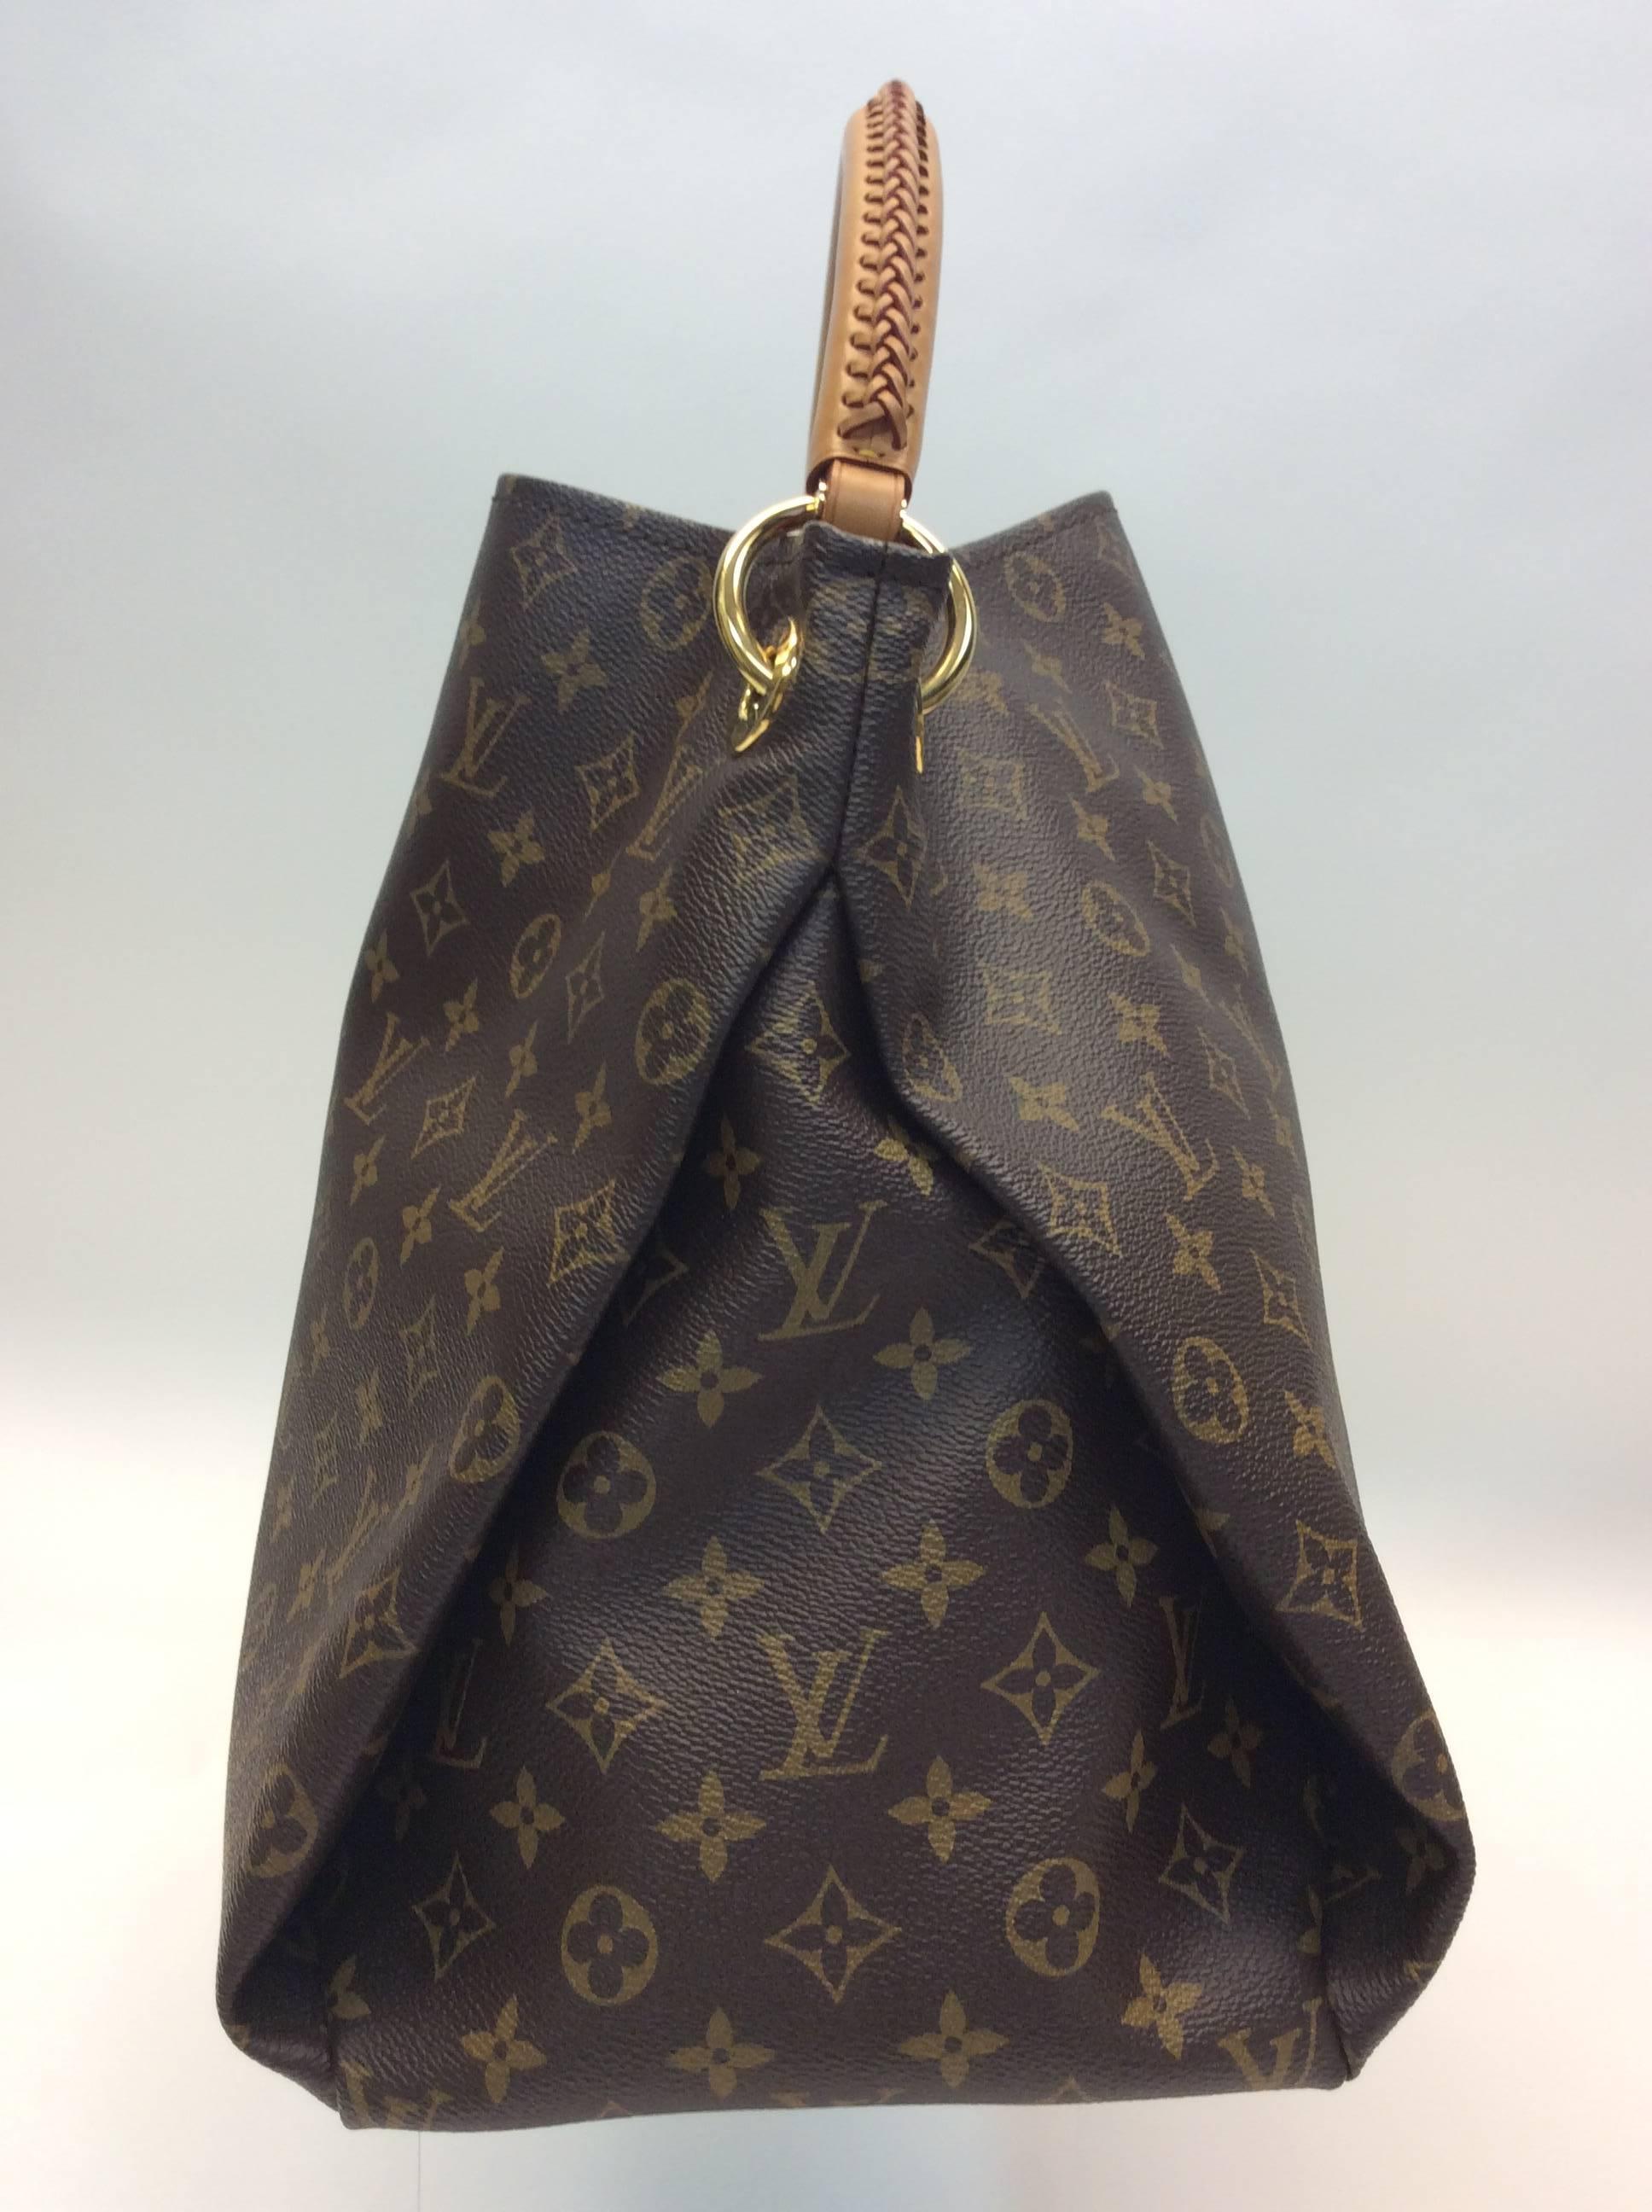 Louis Vuitton Artsy MM Tote In Excellent Condition For Sale In Narberth, PA